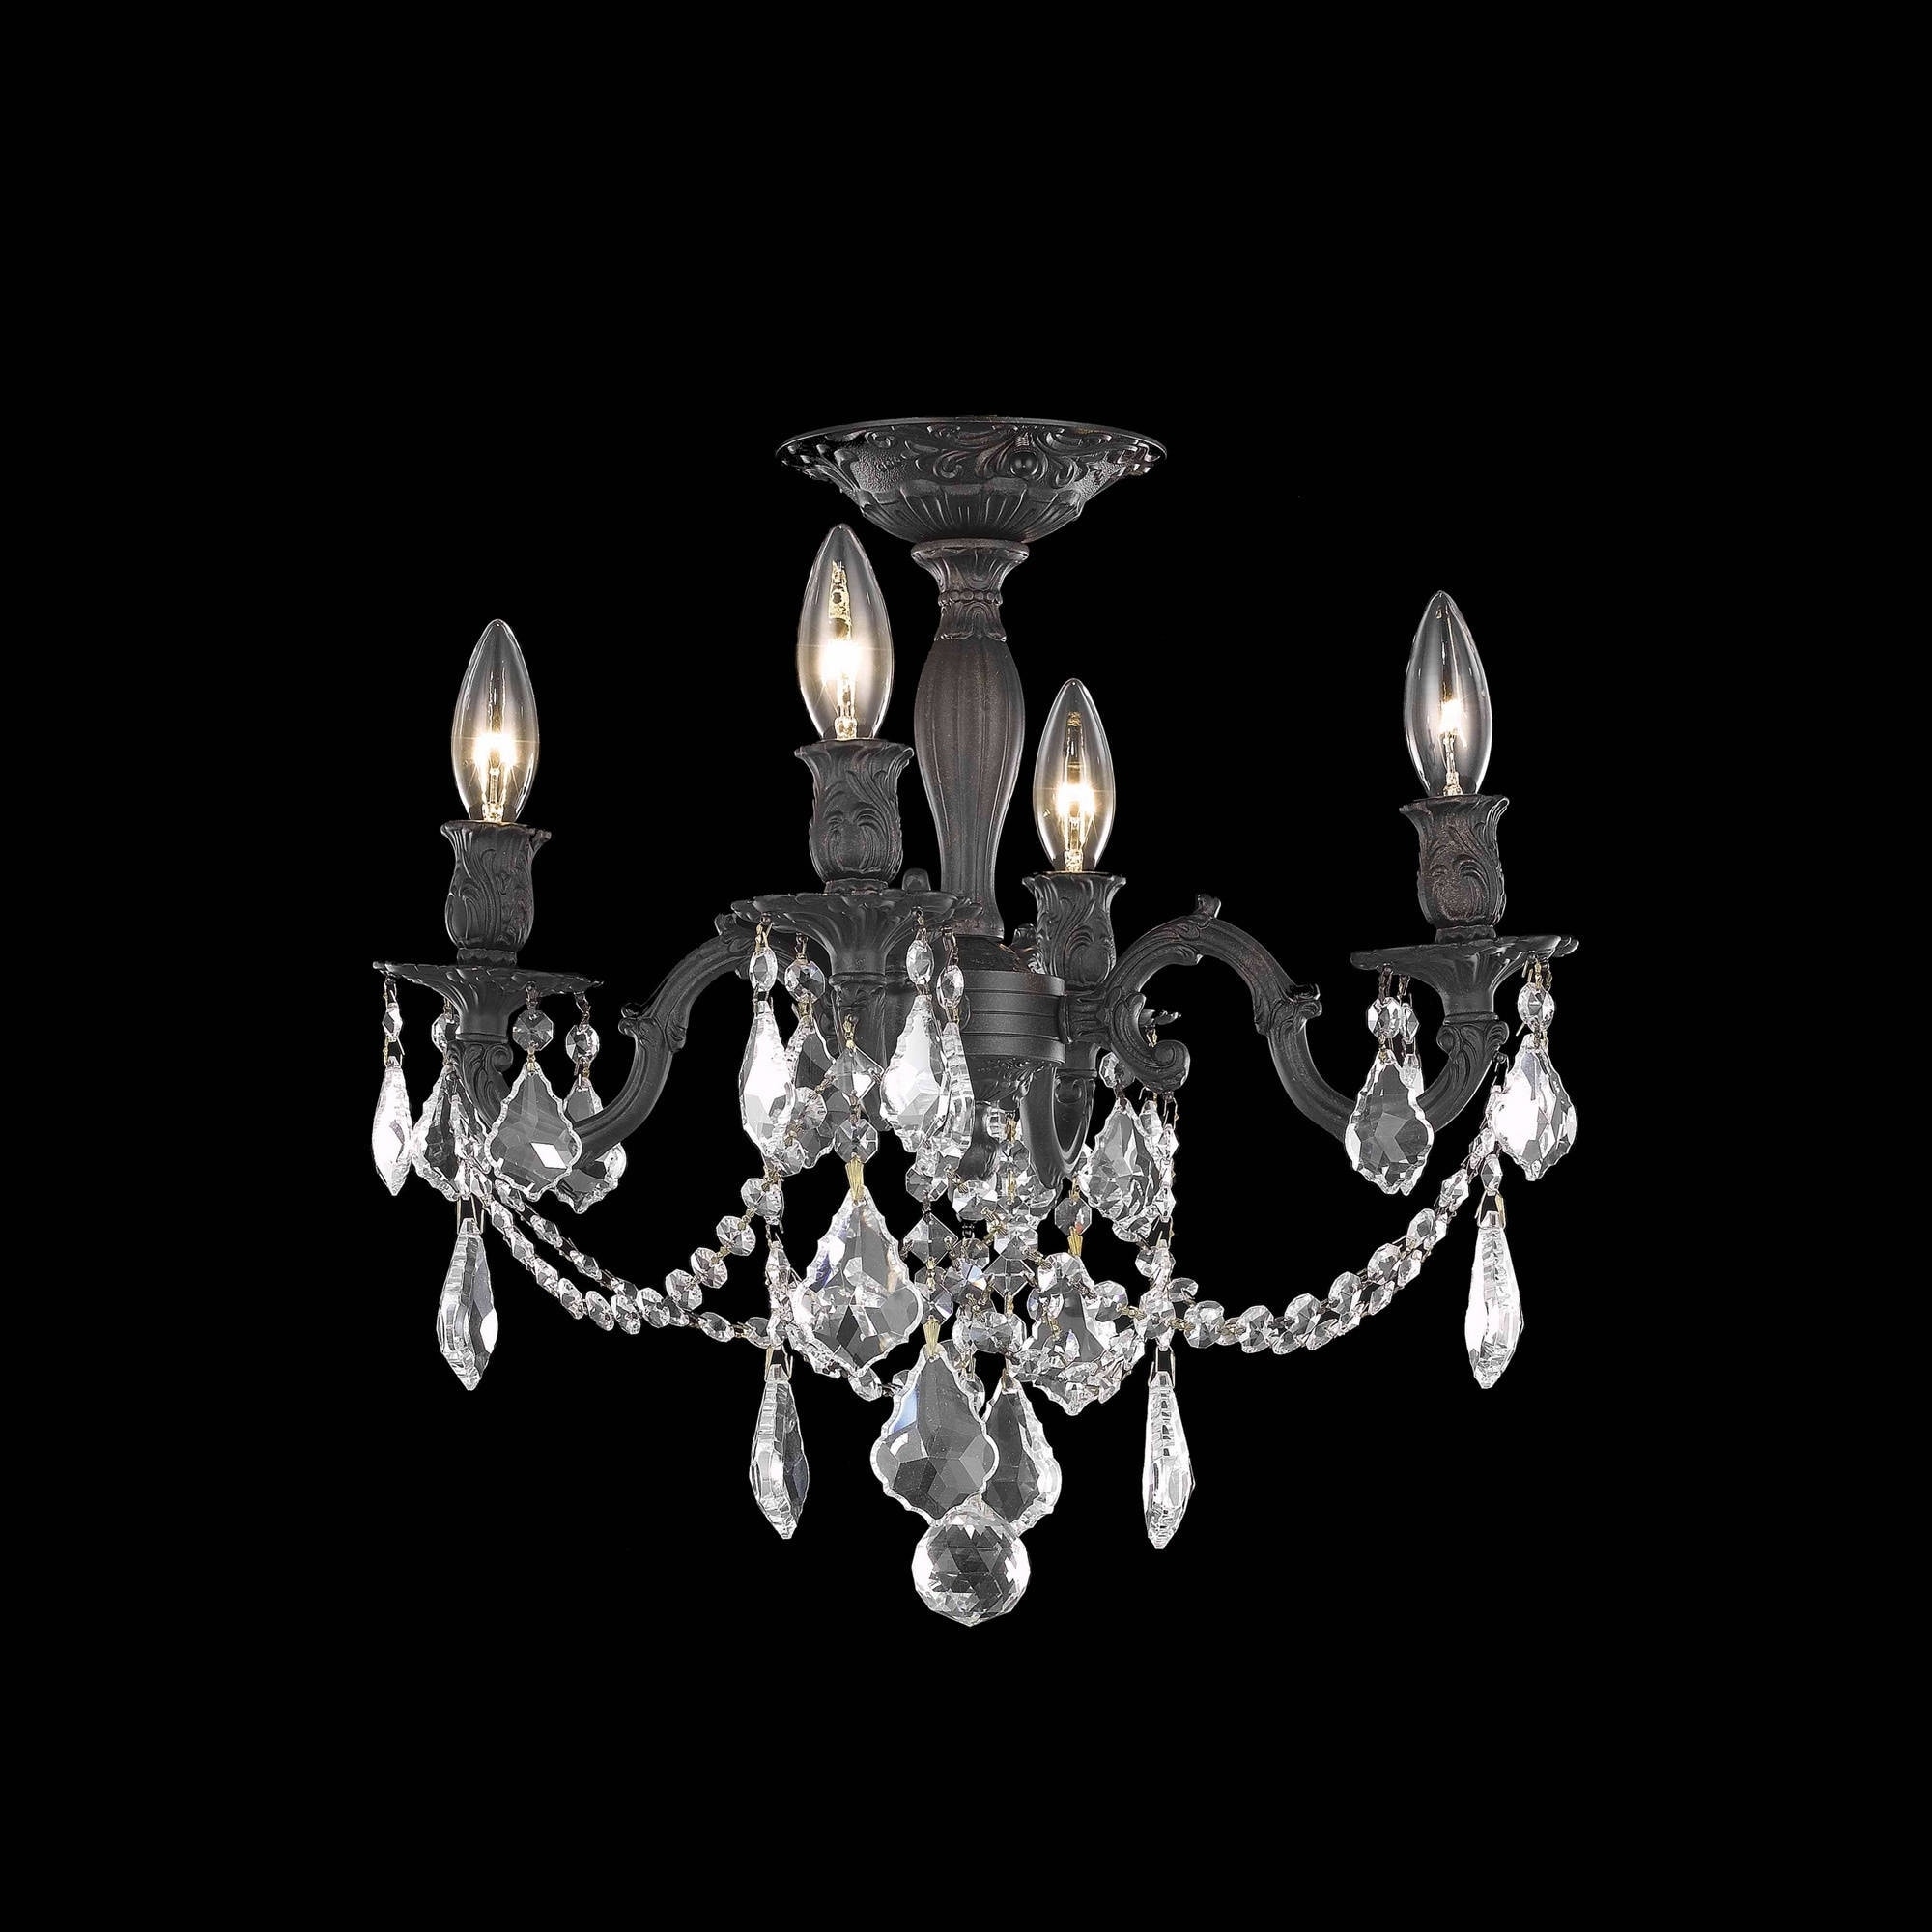 Christopher Knight Home Zurich 4 light Royal Cut Crystal And Bronze Flush Mount